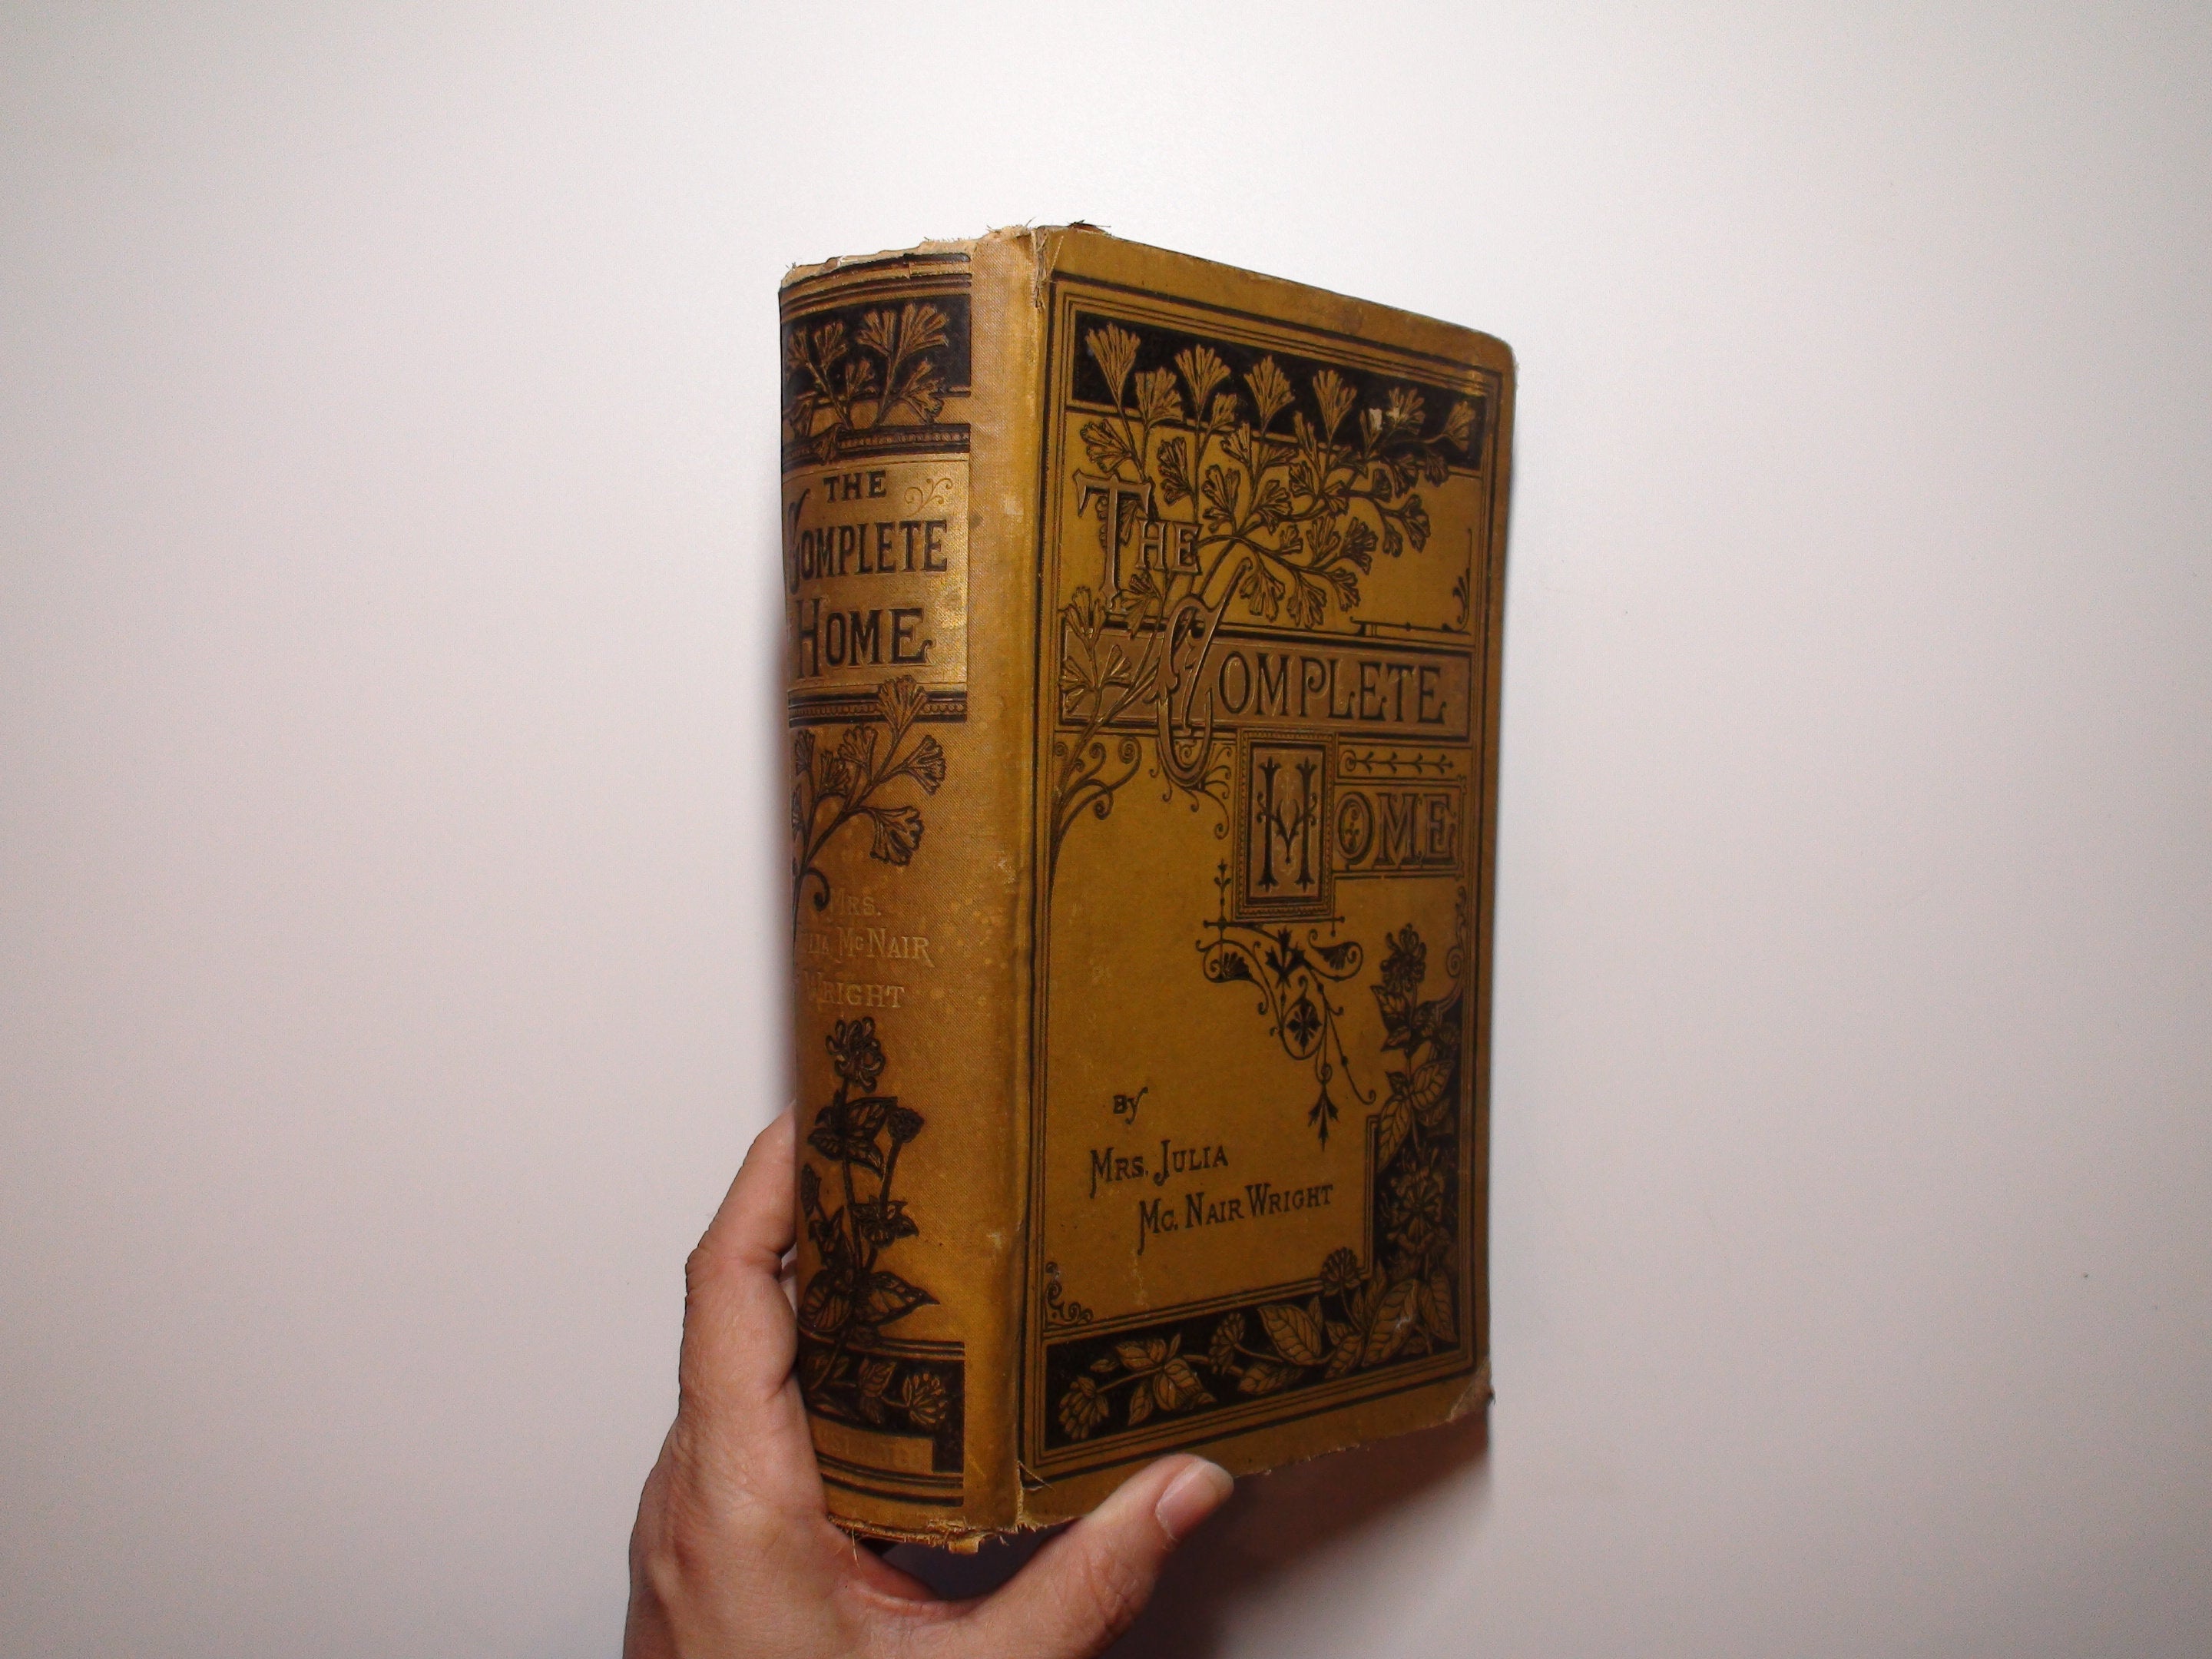 The Complete Home an Encyclopedia, Mrs. Julia McNair Wright, 1879, Illustrated